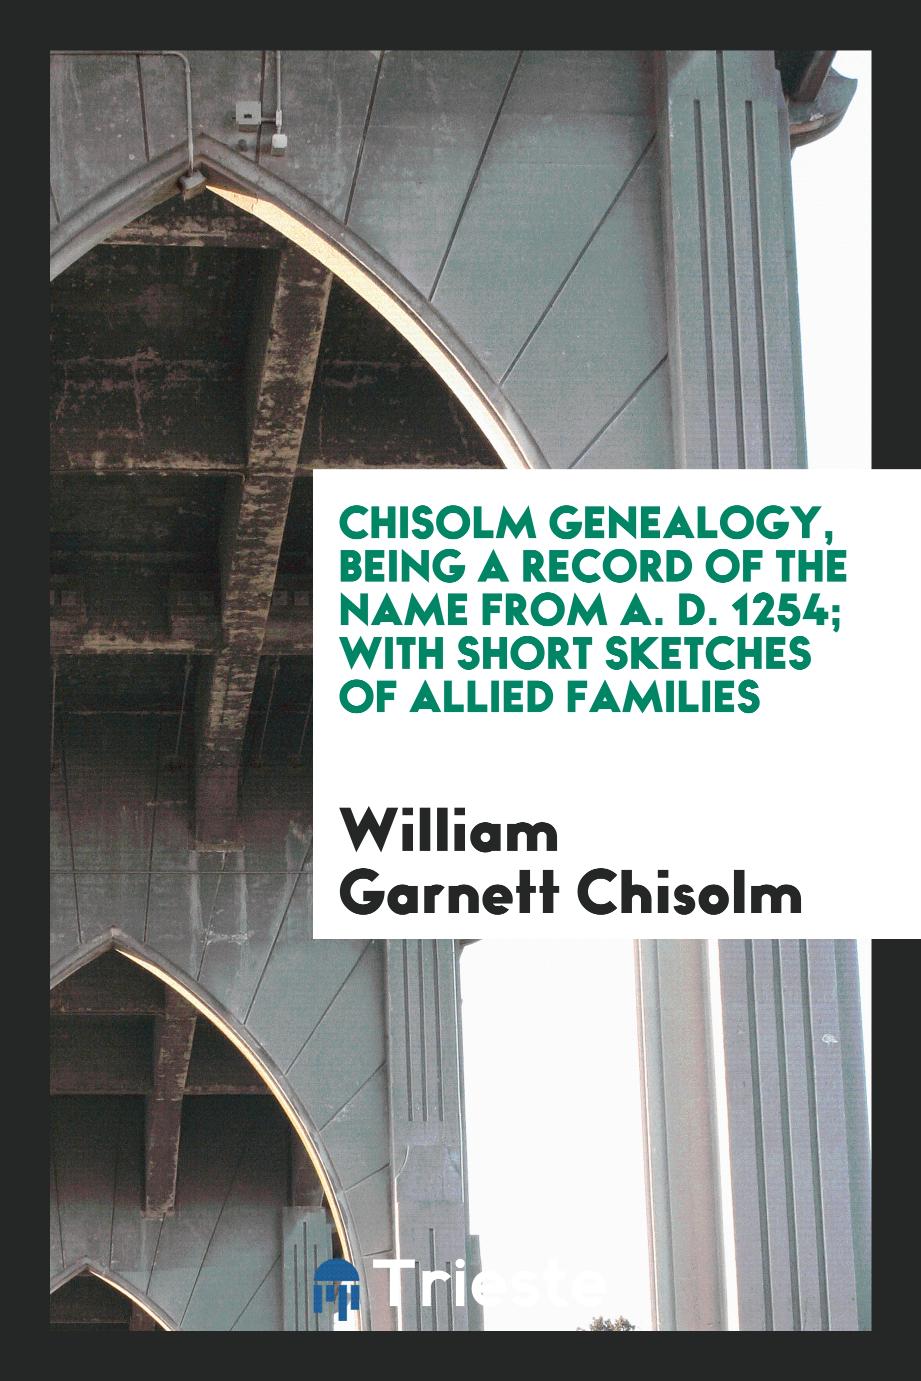 Chisolm genealogy, being a record of the name from A. D. 1254; with short sketches of allied families